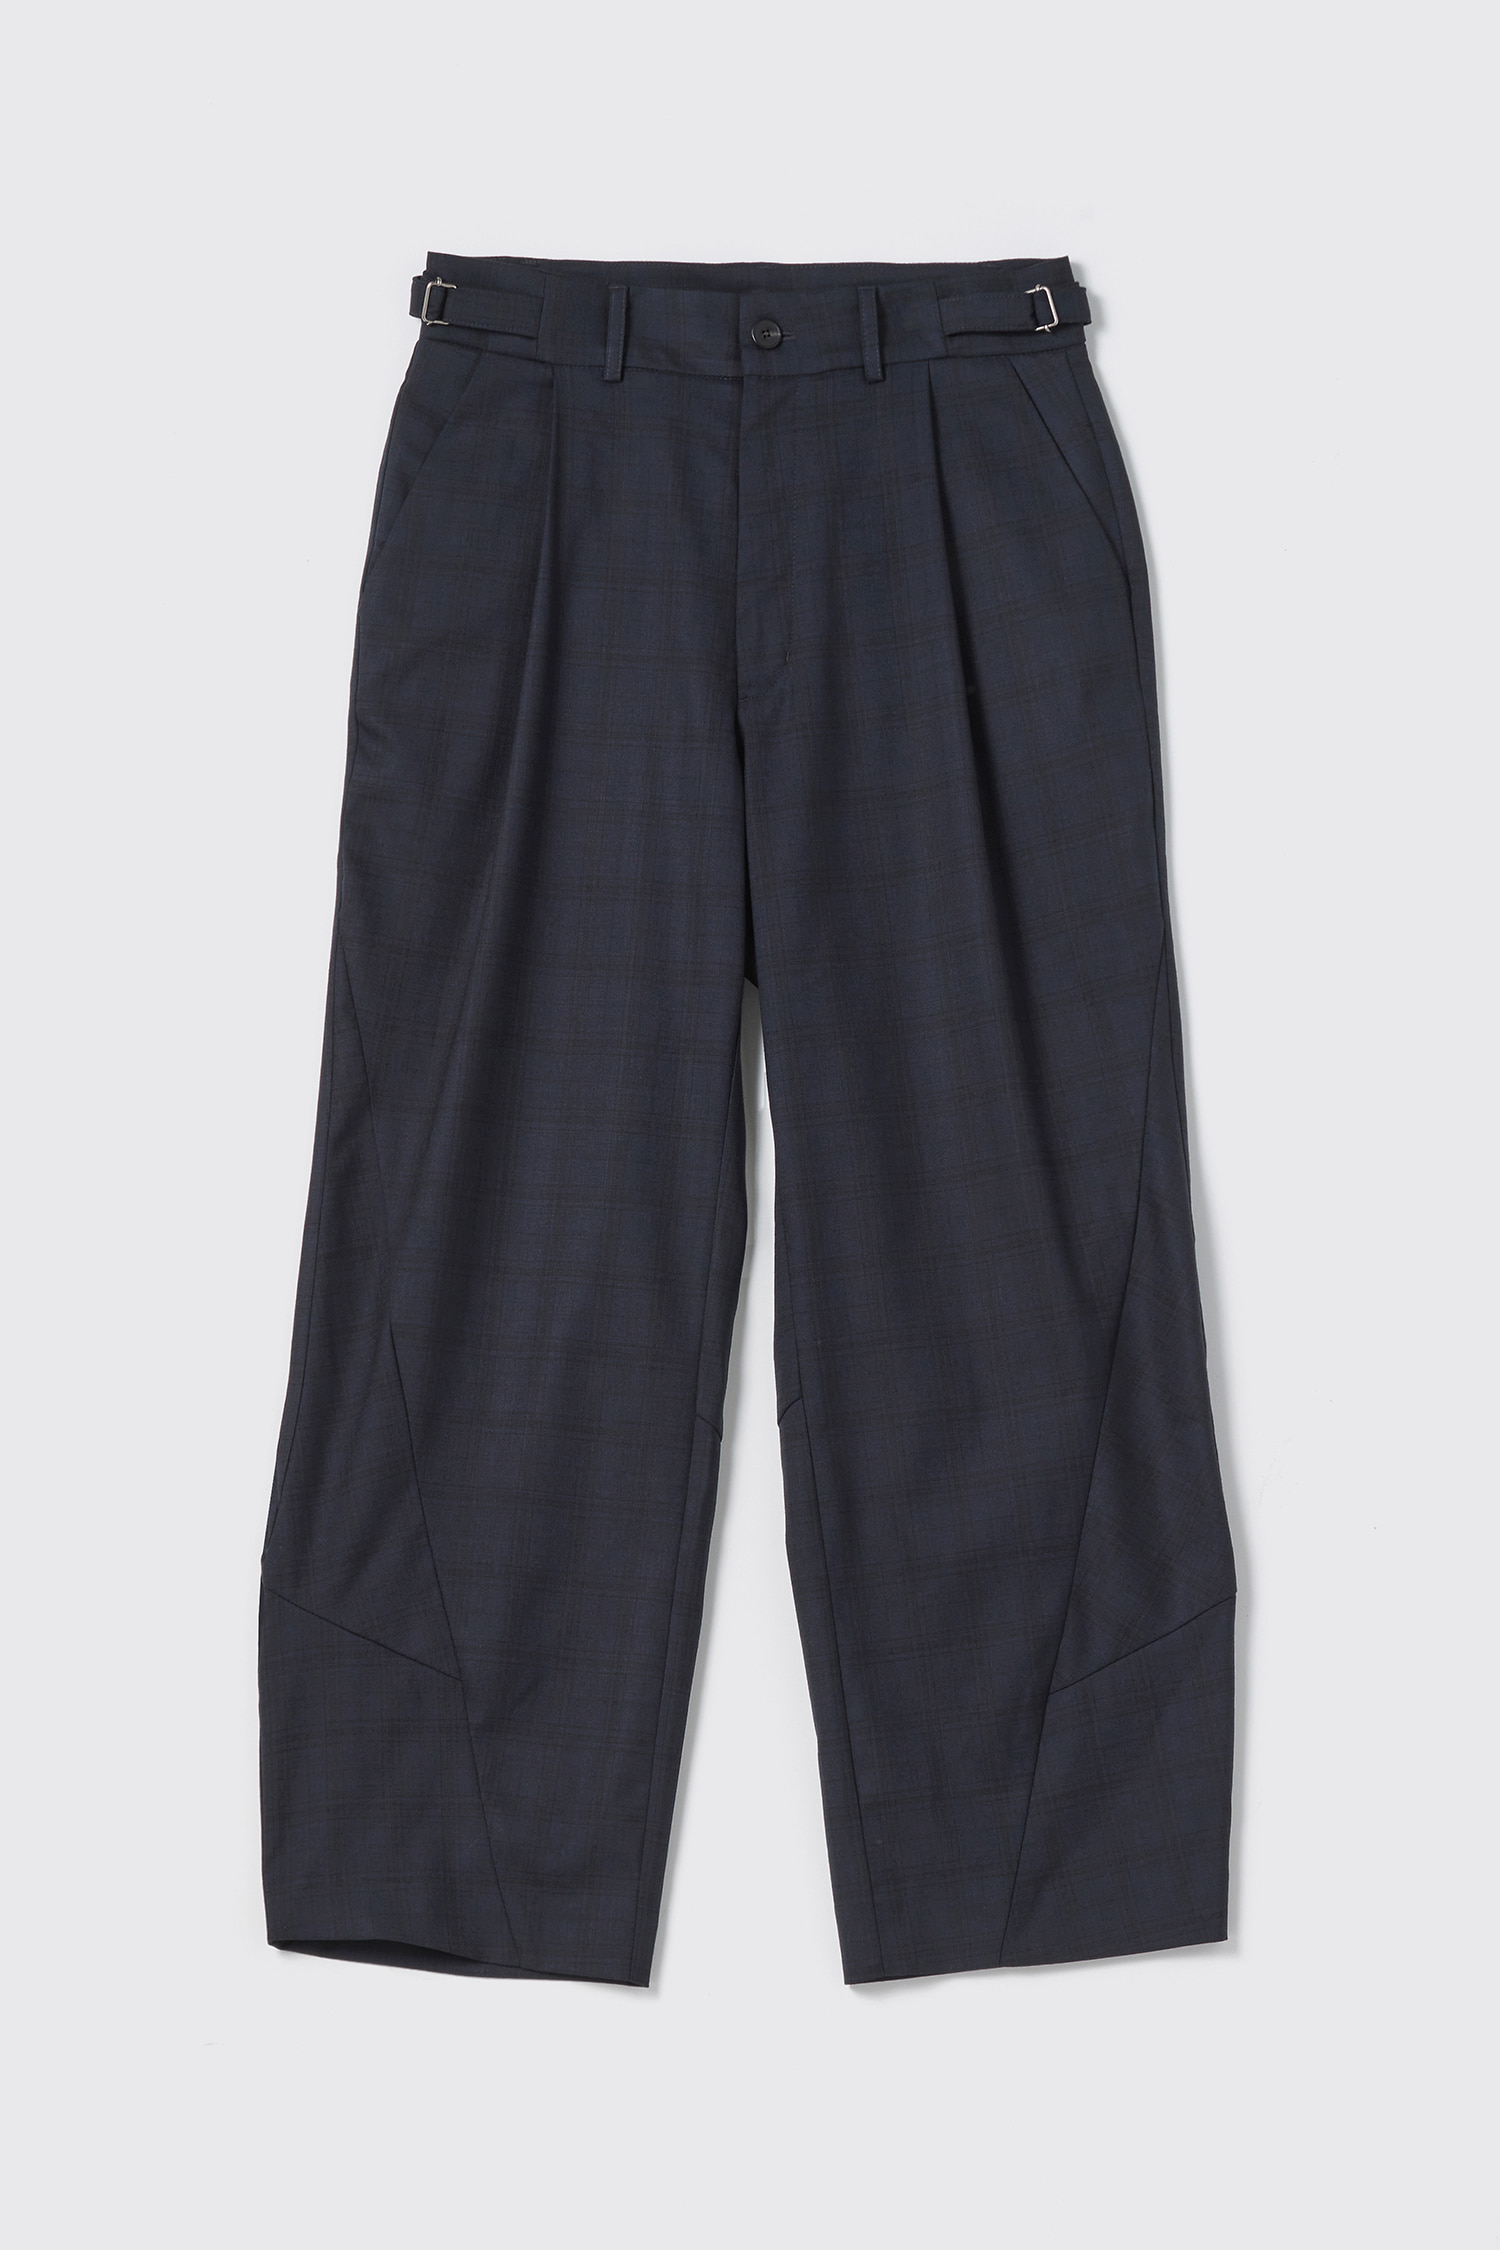 Triangle Trousers Navy Check Wool